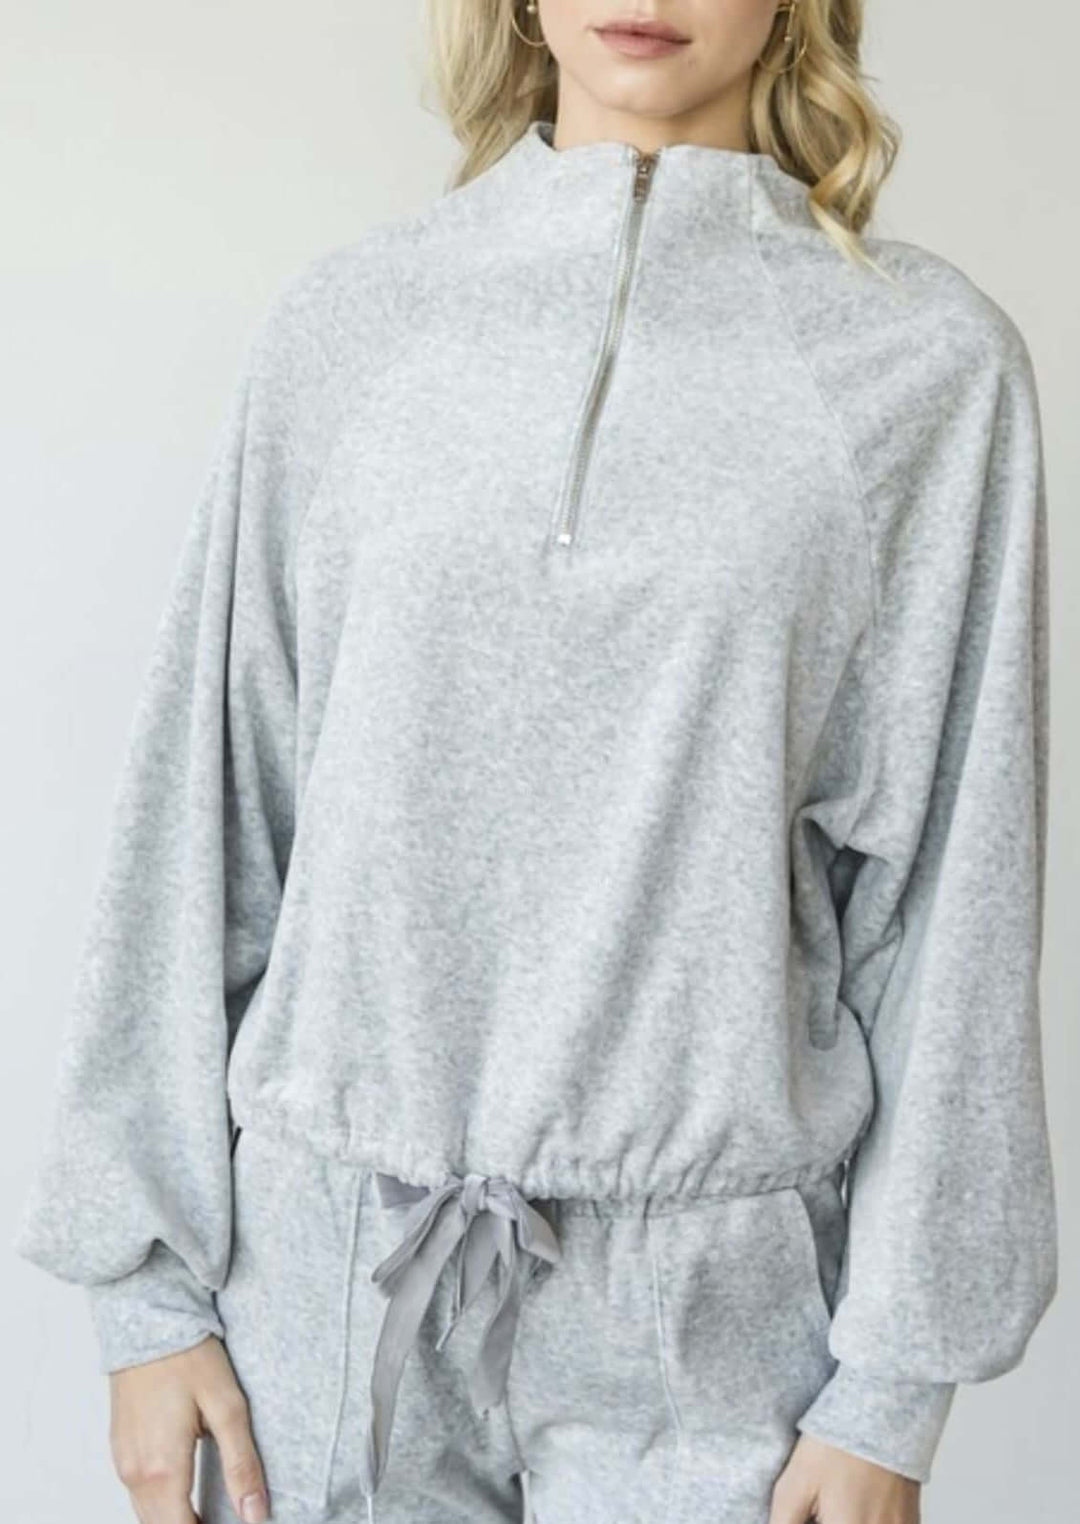 USA Made Women's Heather Gray Velour Half Zip Casual Pullover with Draw String Waist puff sleeves and a mock neck | Classy Cozy Cool Women's Made in America Clothing Boutique